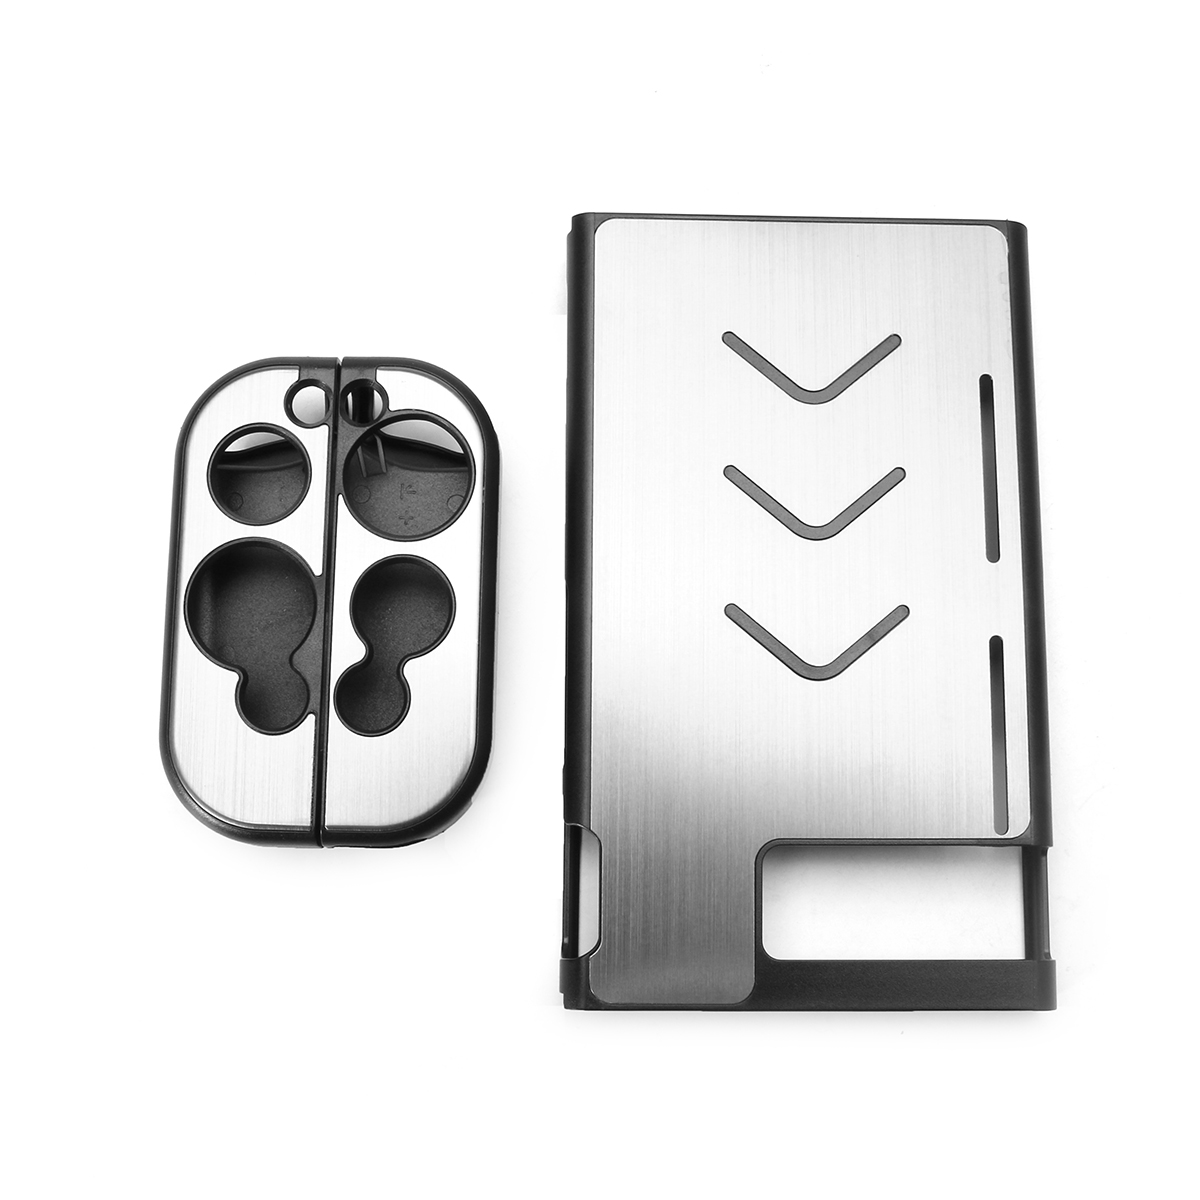 Replacement Accessories Housing Shell Case Protective For Nintendo Switch Controller Joy-con 21